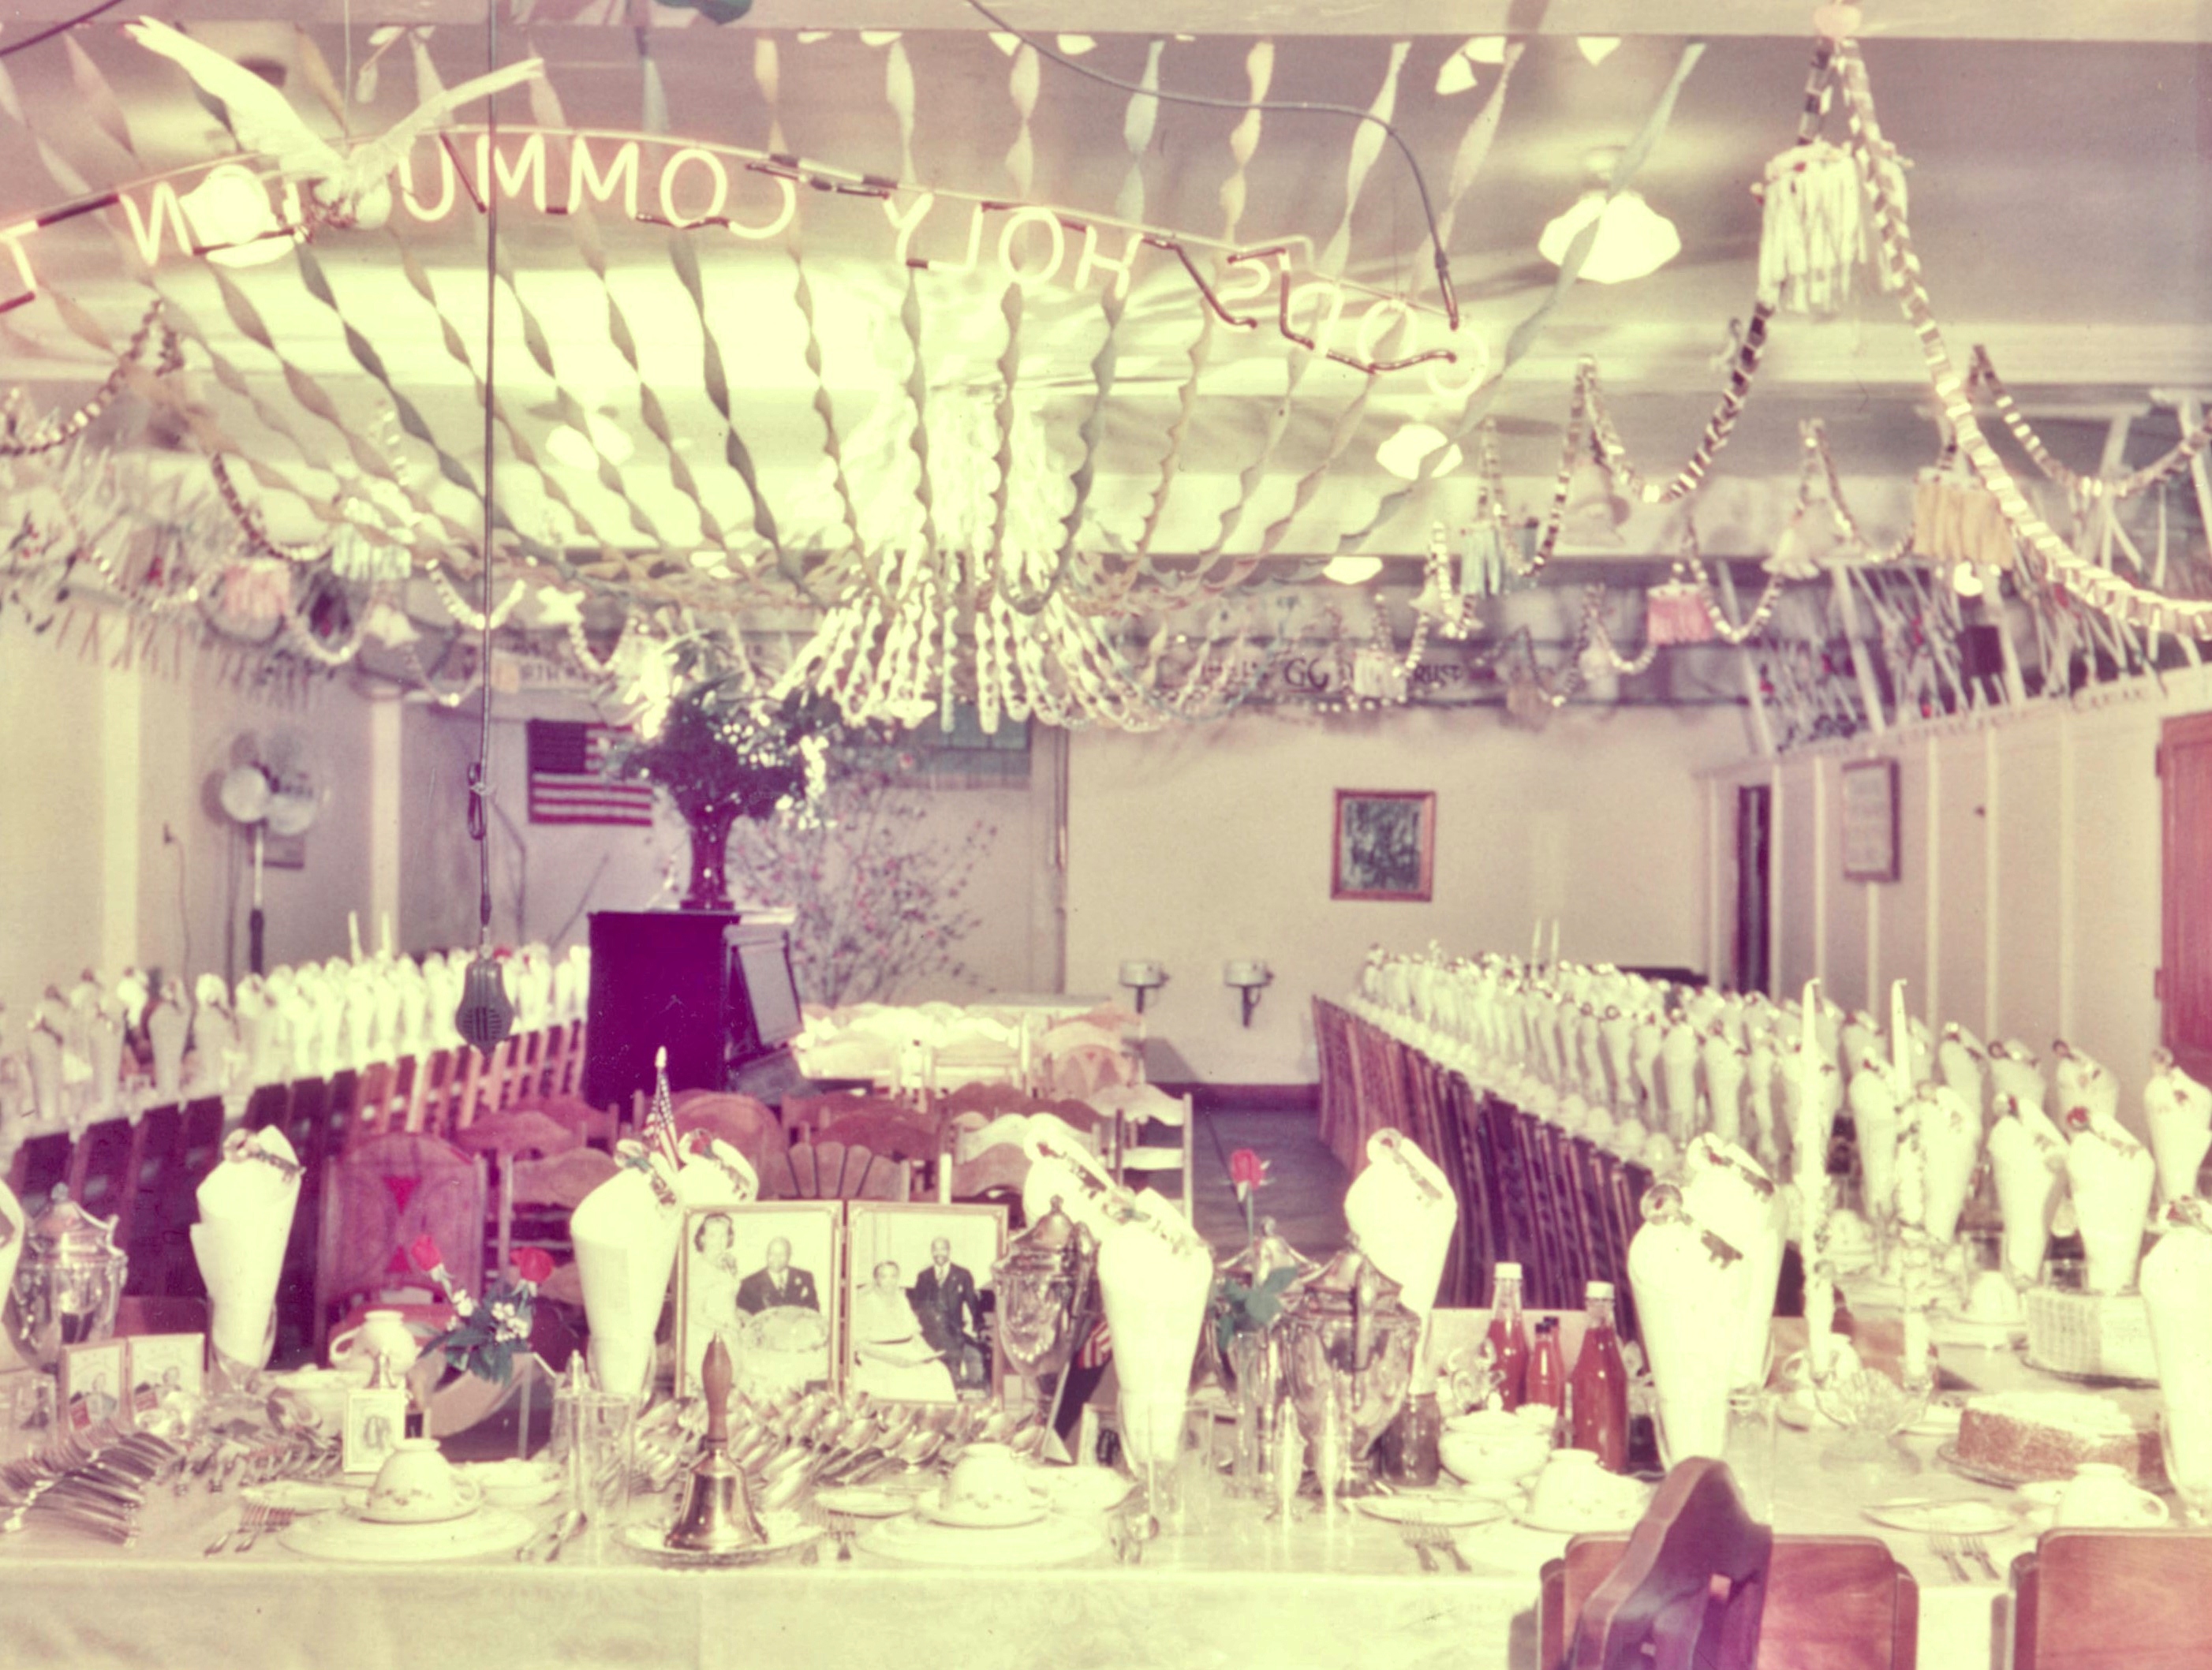 The Holy Communion Banquet room